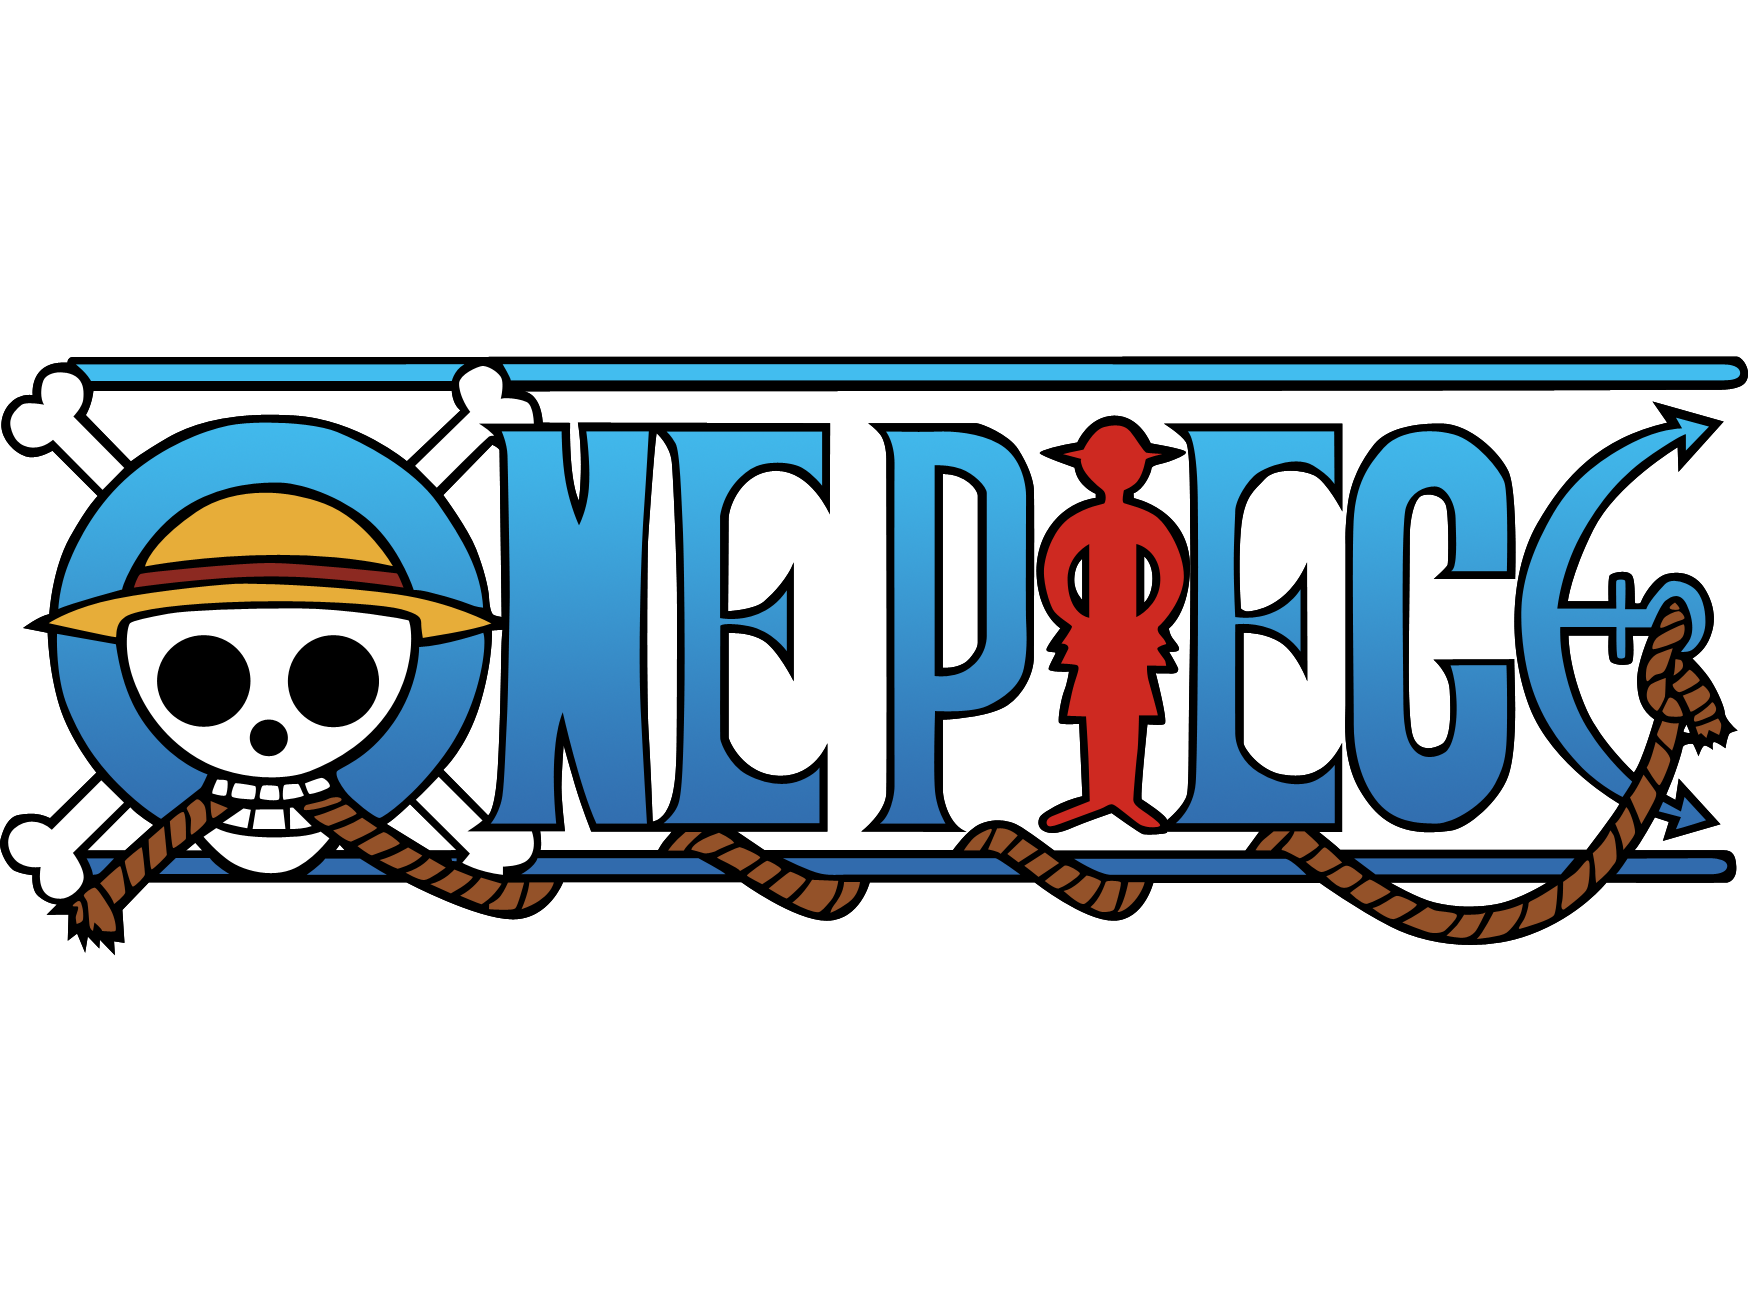 List of One Piece characters - Wikiwand